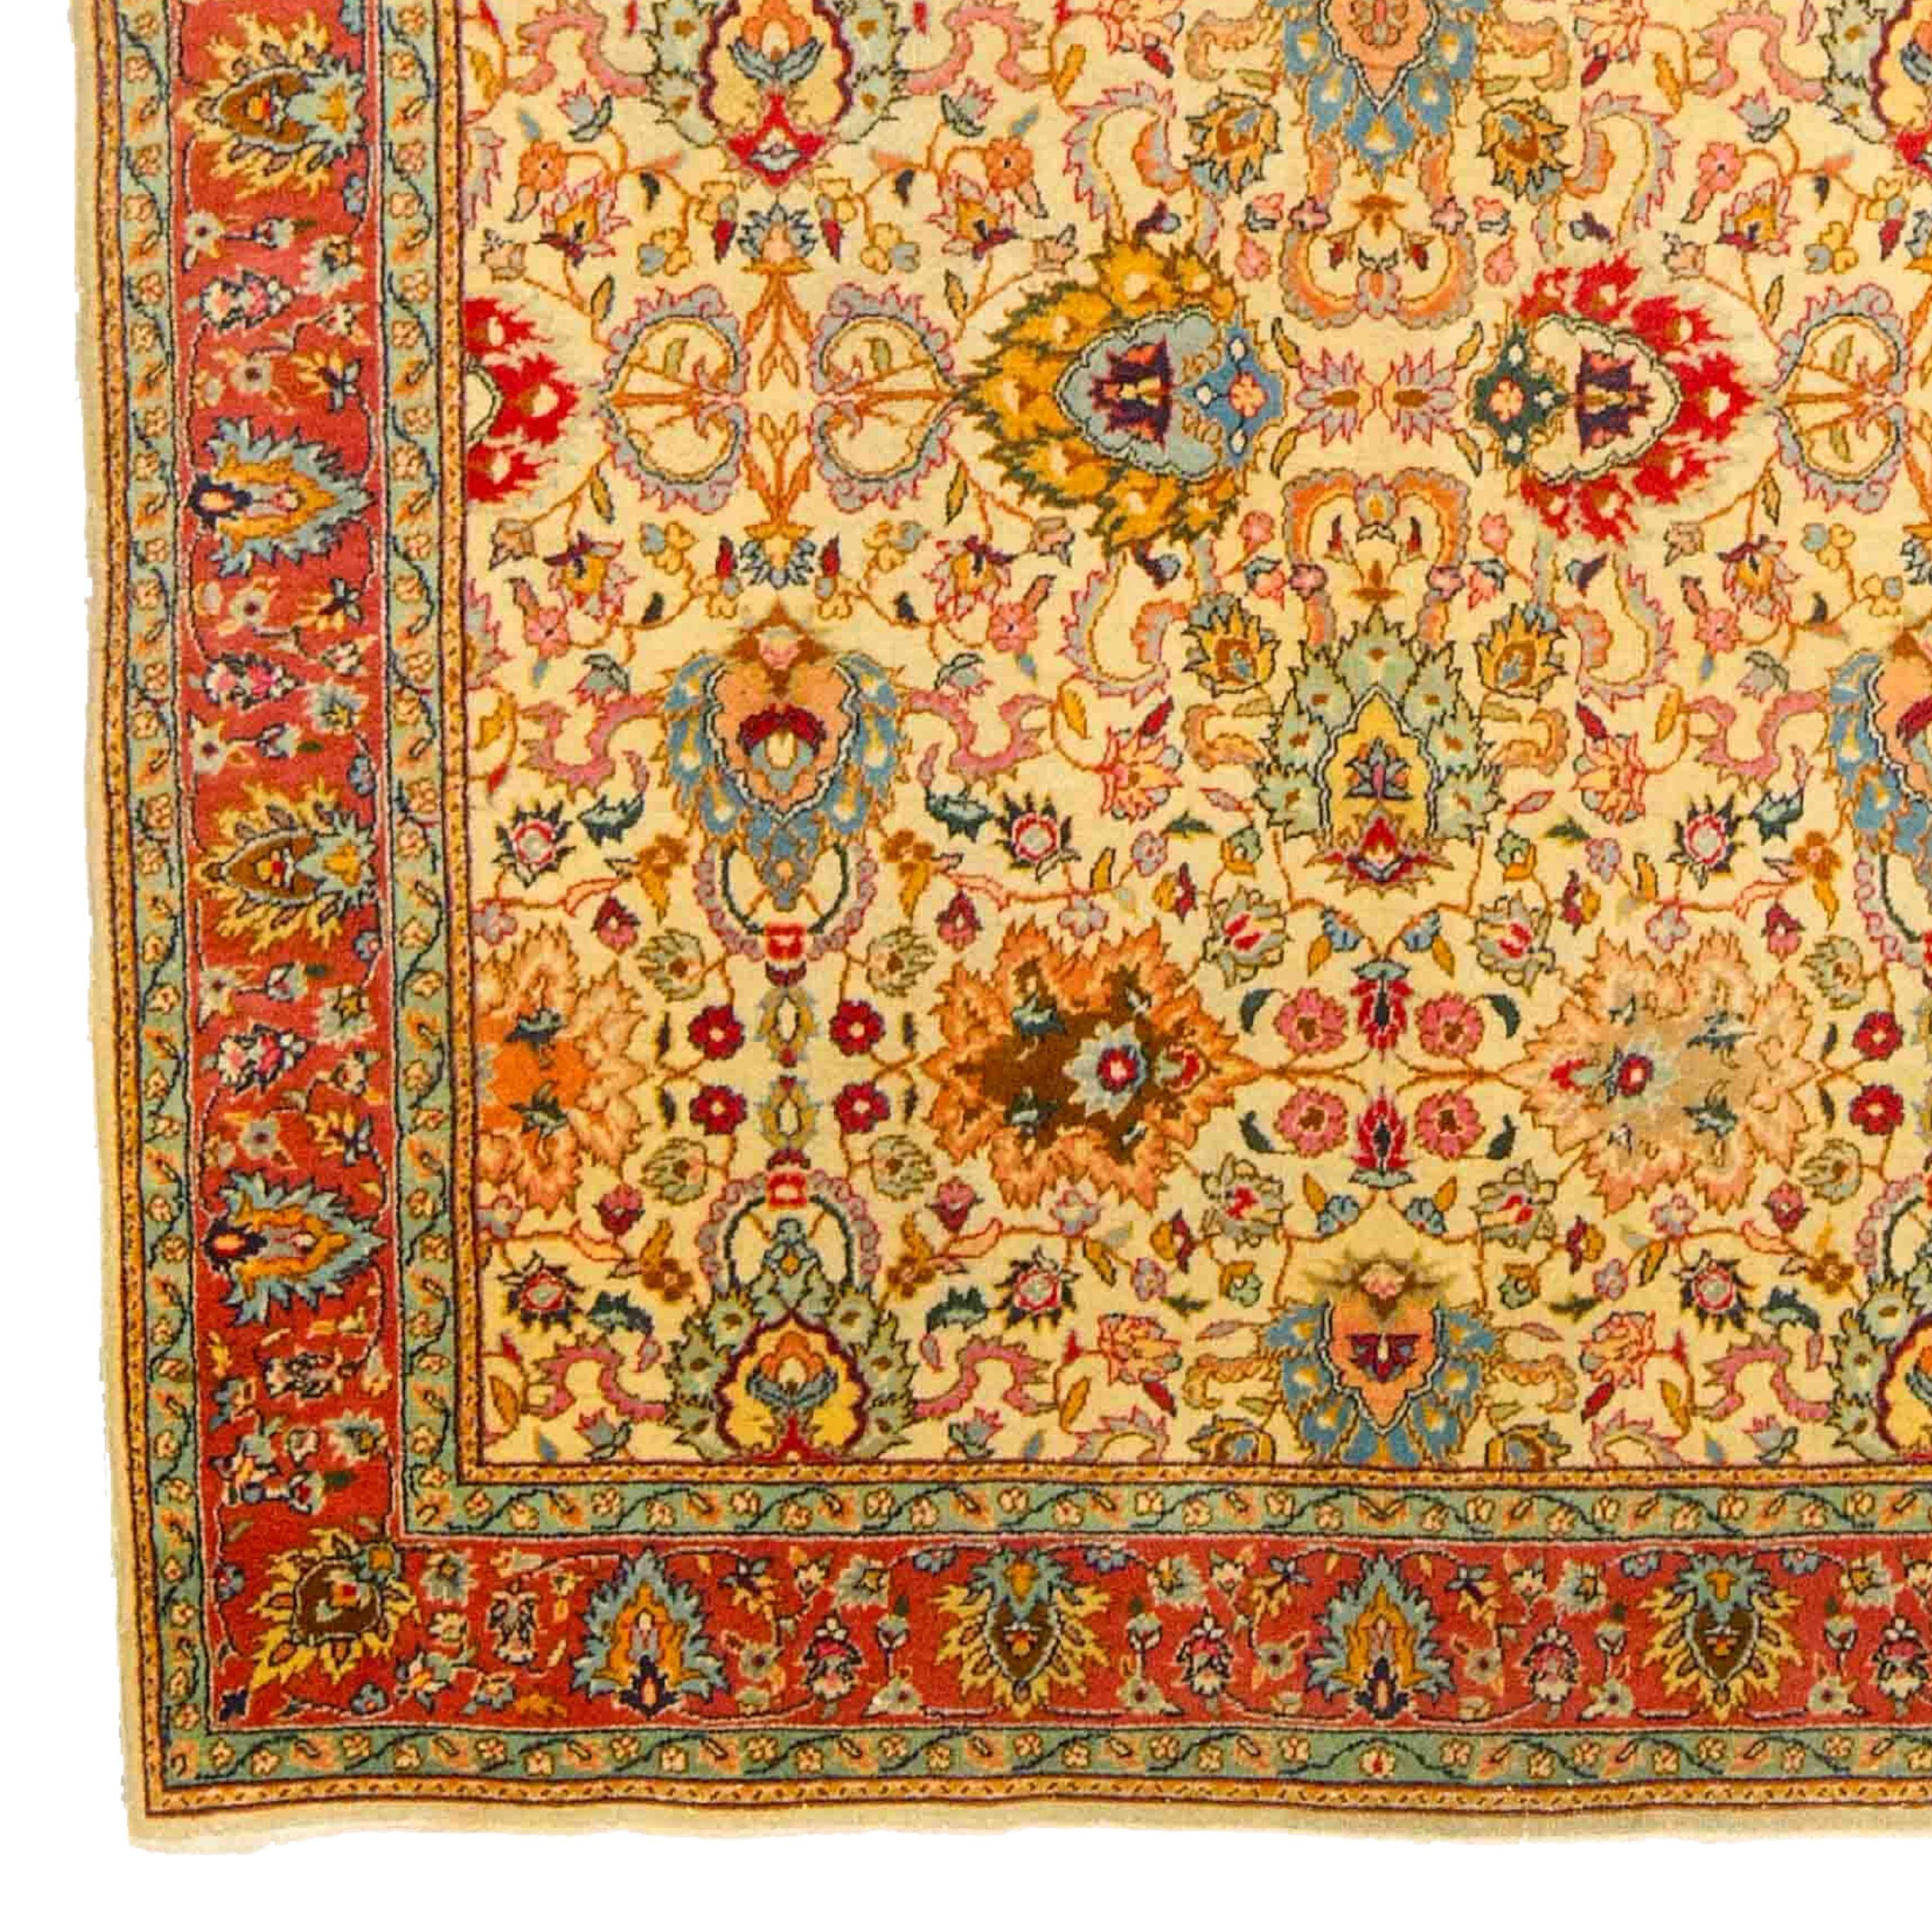 Antique Tabriz Rug 150x250 cm (4,92 x 8,20 ft) Late of 19th Century Azerbaijan Tabriz Rug

From the mid-19th century, there was a revival in commercial carpet production in Azerbaijan, and Tabriz became one of the country's most important centers